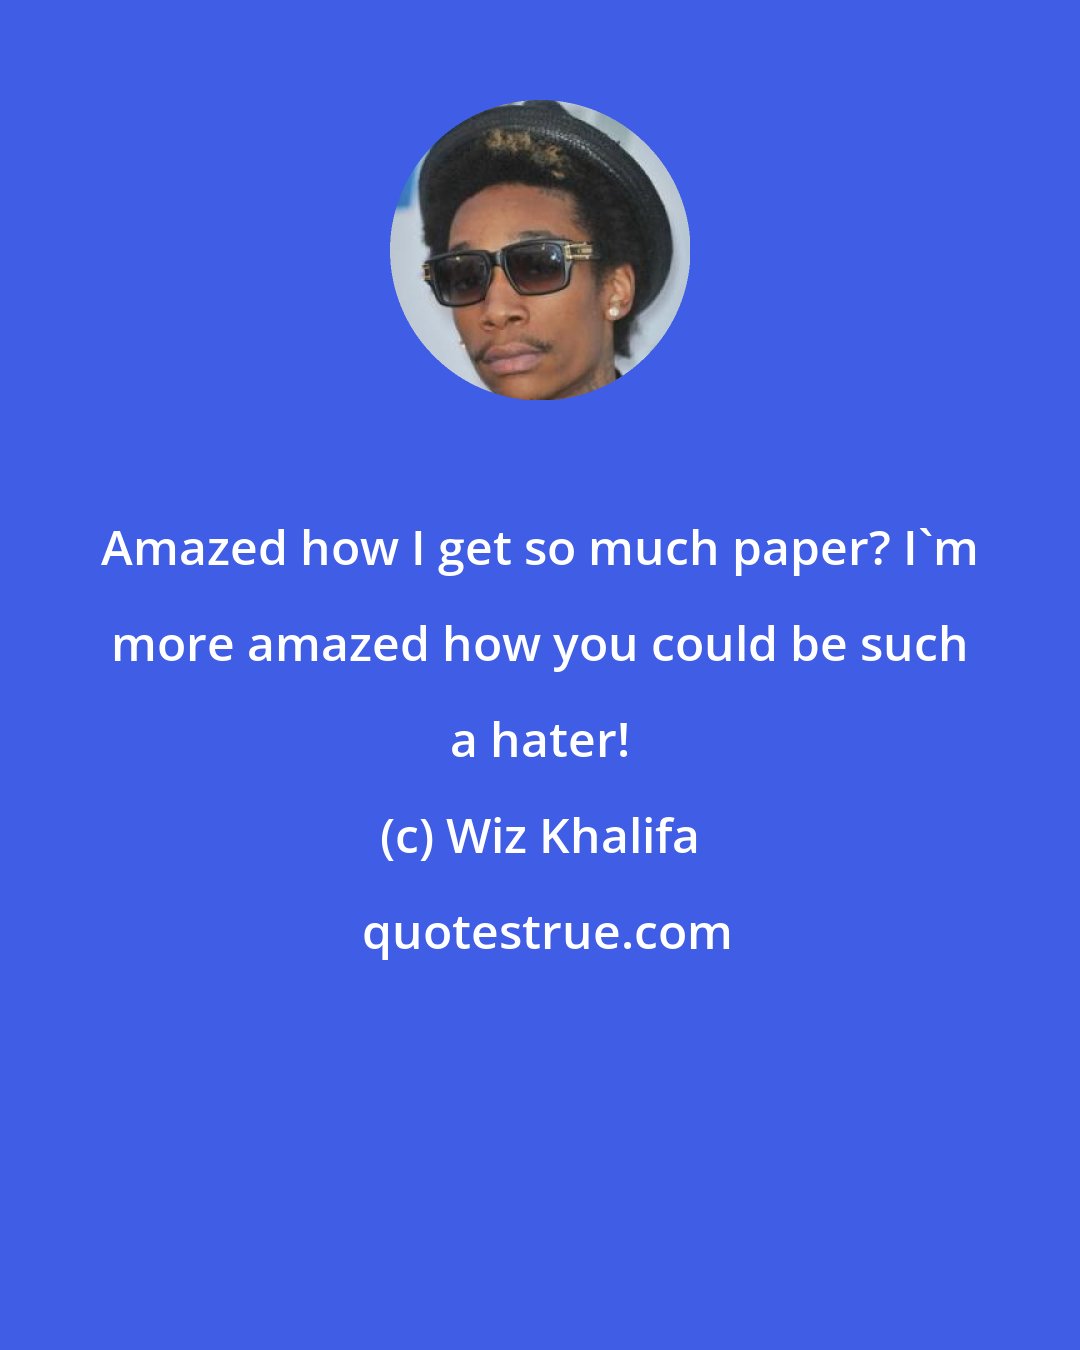 Wiz Khalifa: Amazed how I get so much paper? I'm more amazed how you could be such a hater!